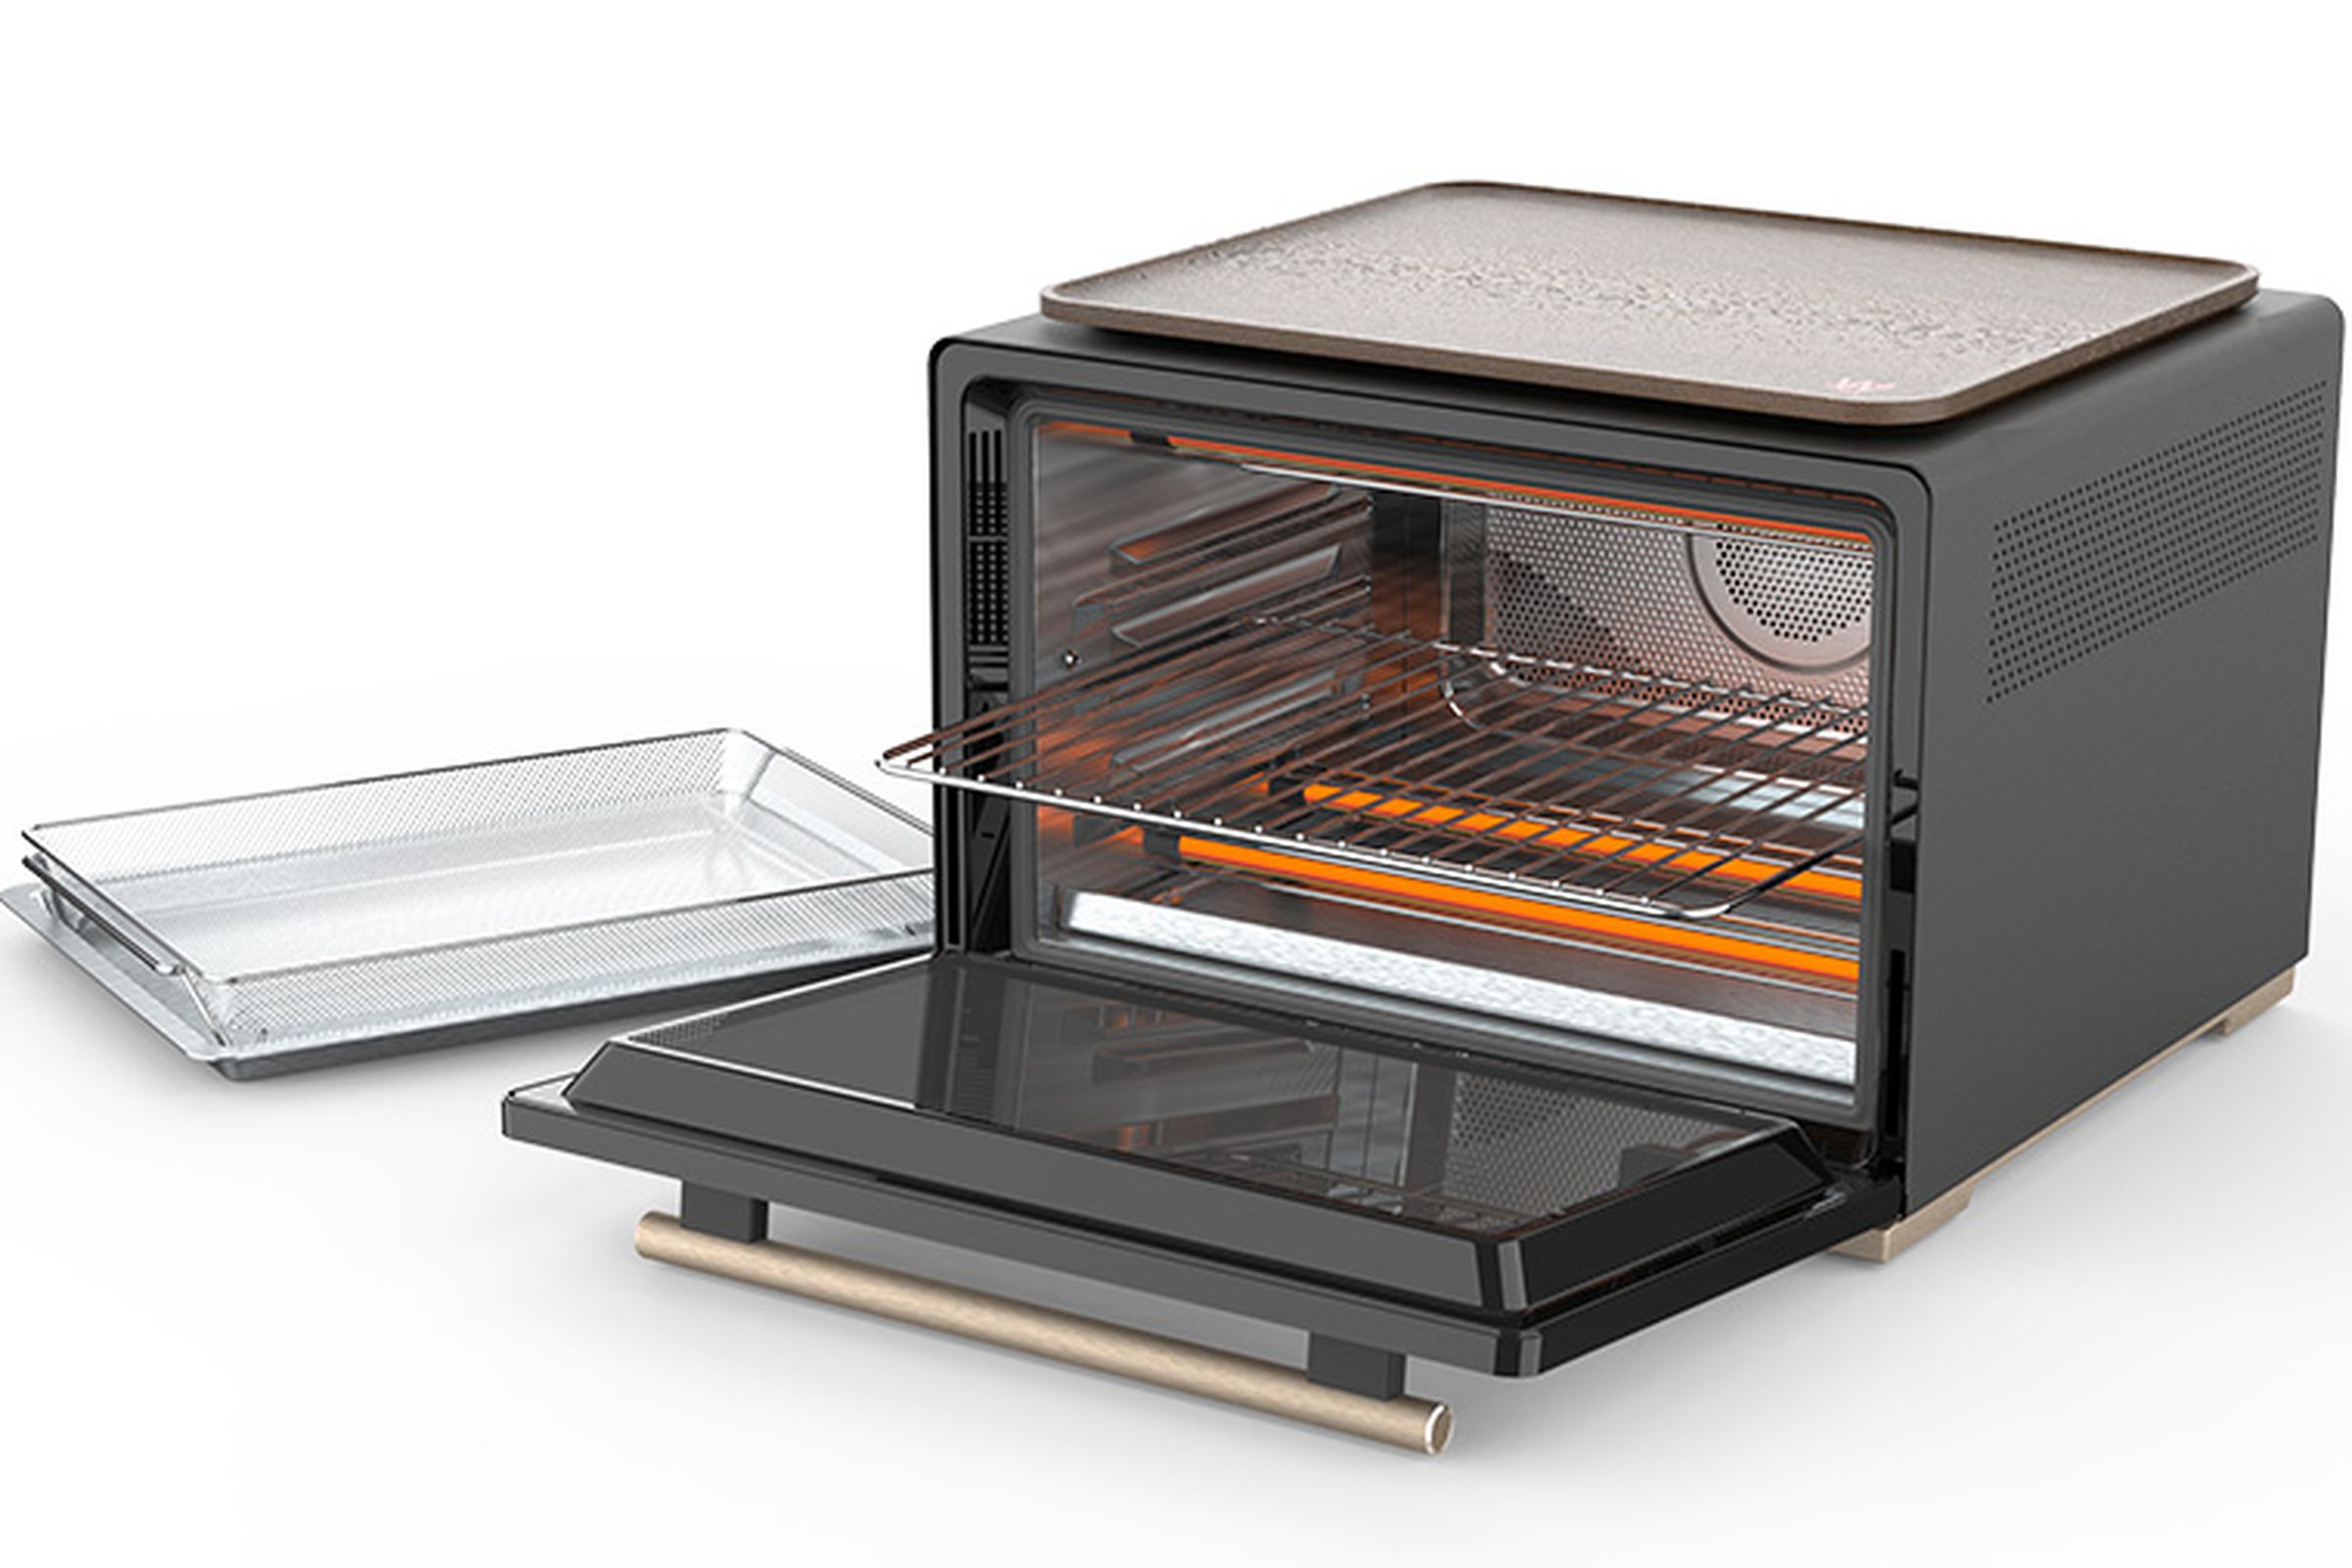 The Smart Countertop Oven lets you watch your food cooking in real time via an internal camera. 